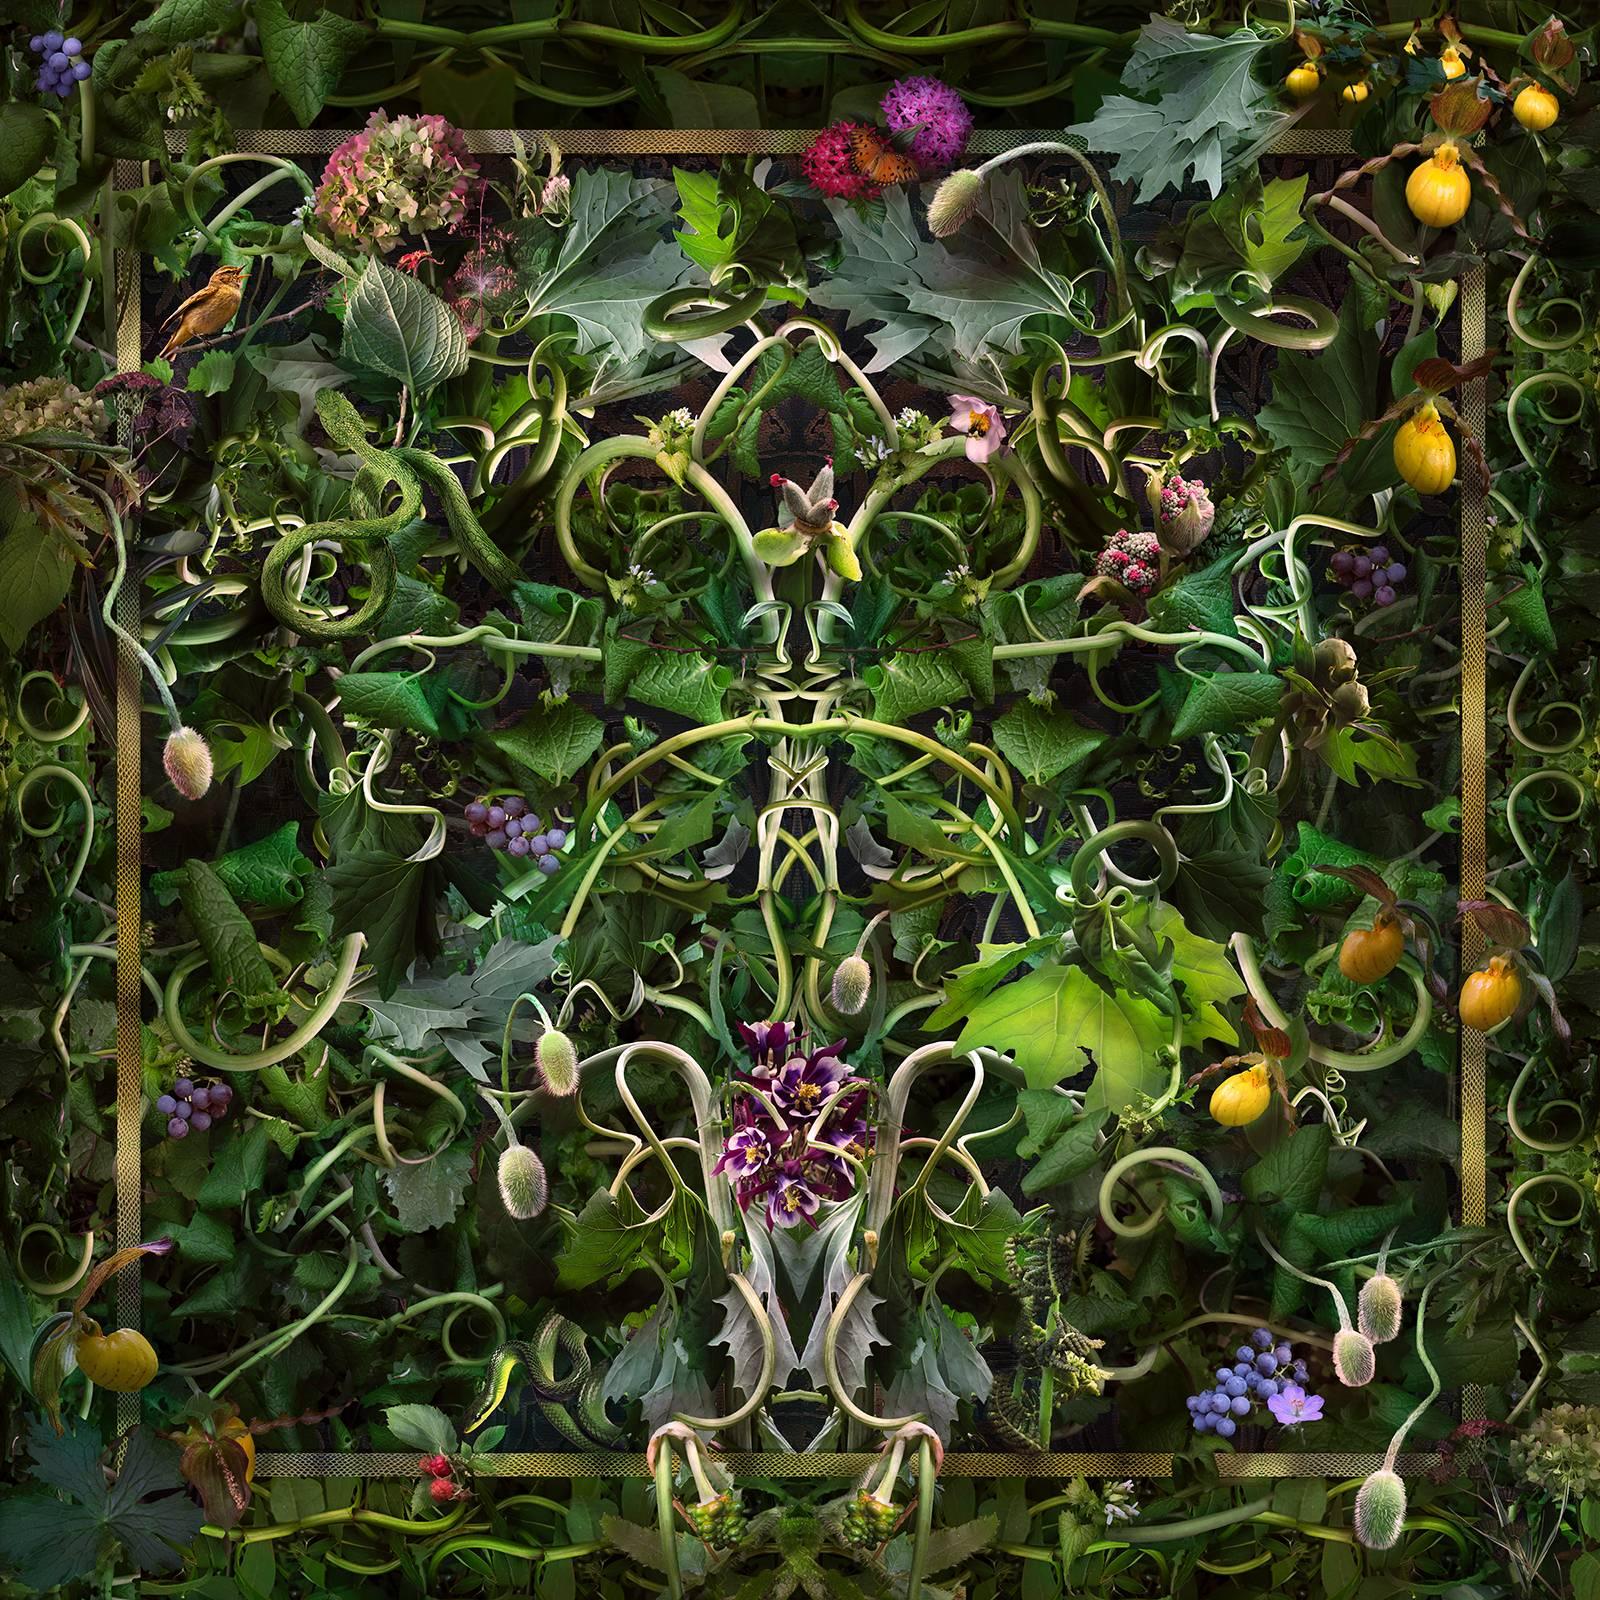 Lisa A. Frank Still-Life Photograph - Feared, Loved (Abstract Baroque Style Still Life Photo of Green Vines & Flowers)